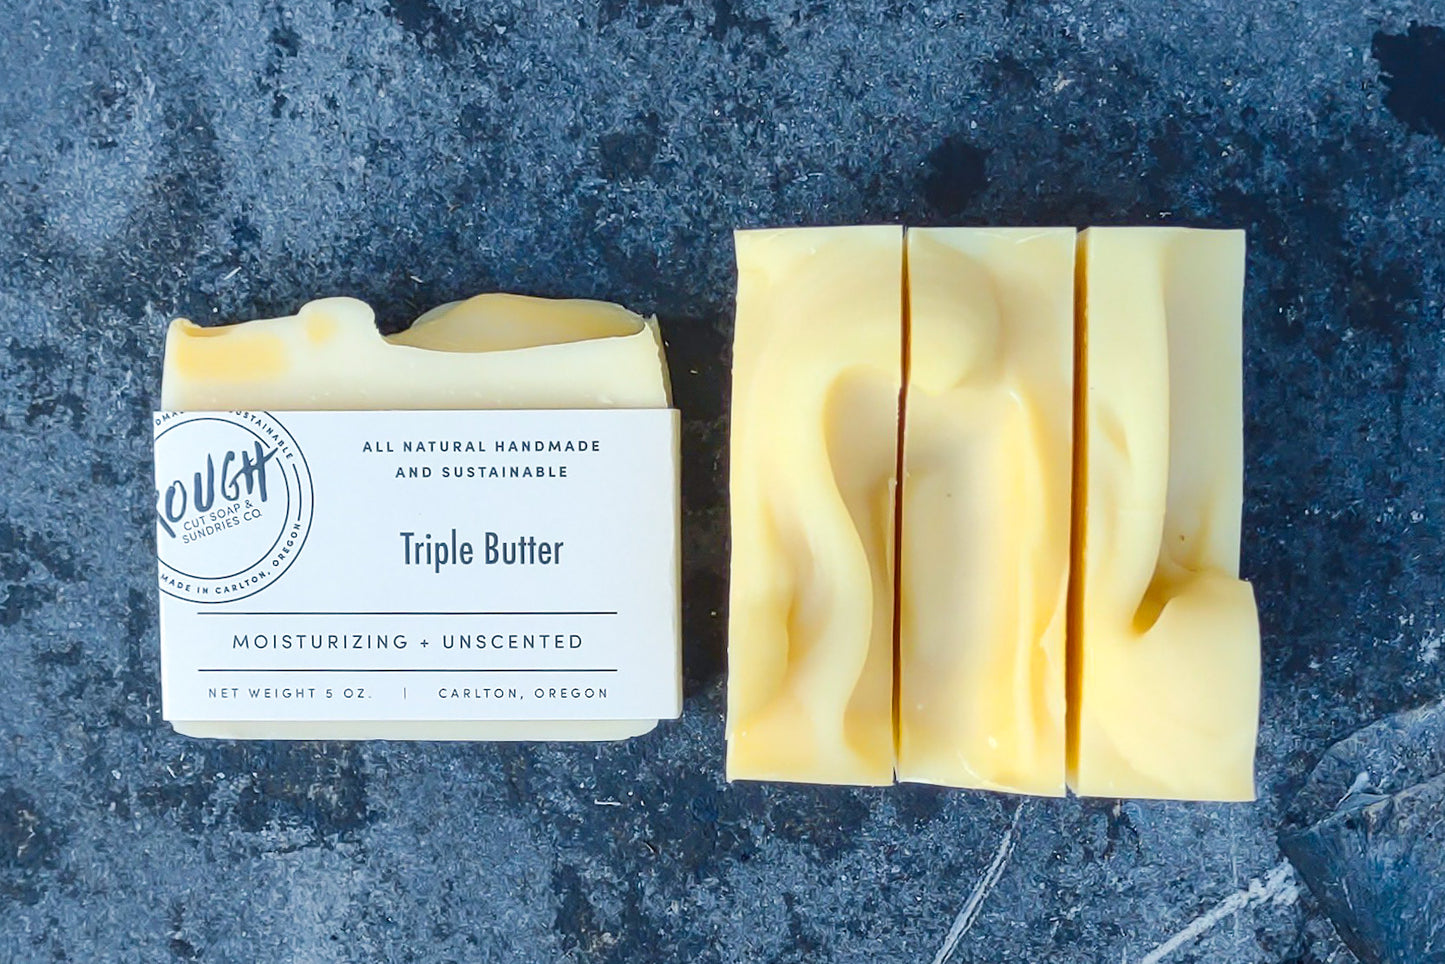 Triple Butter Handcrafted Artisan Rough Cut Soap